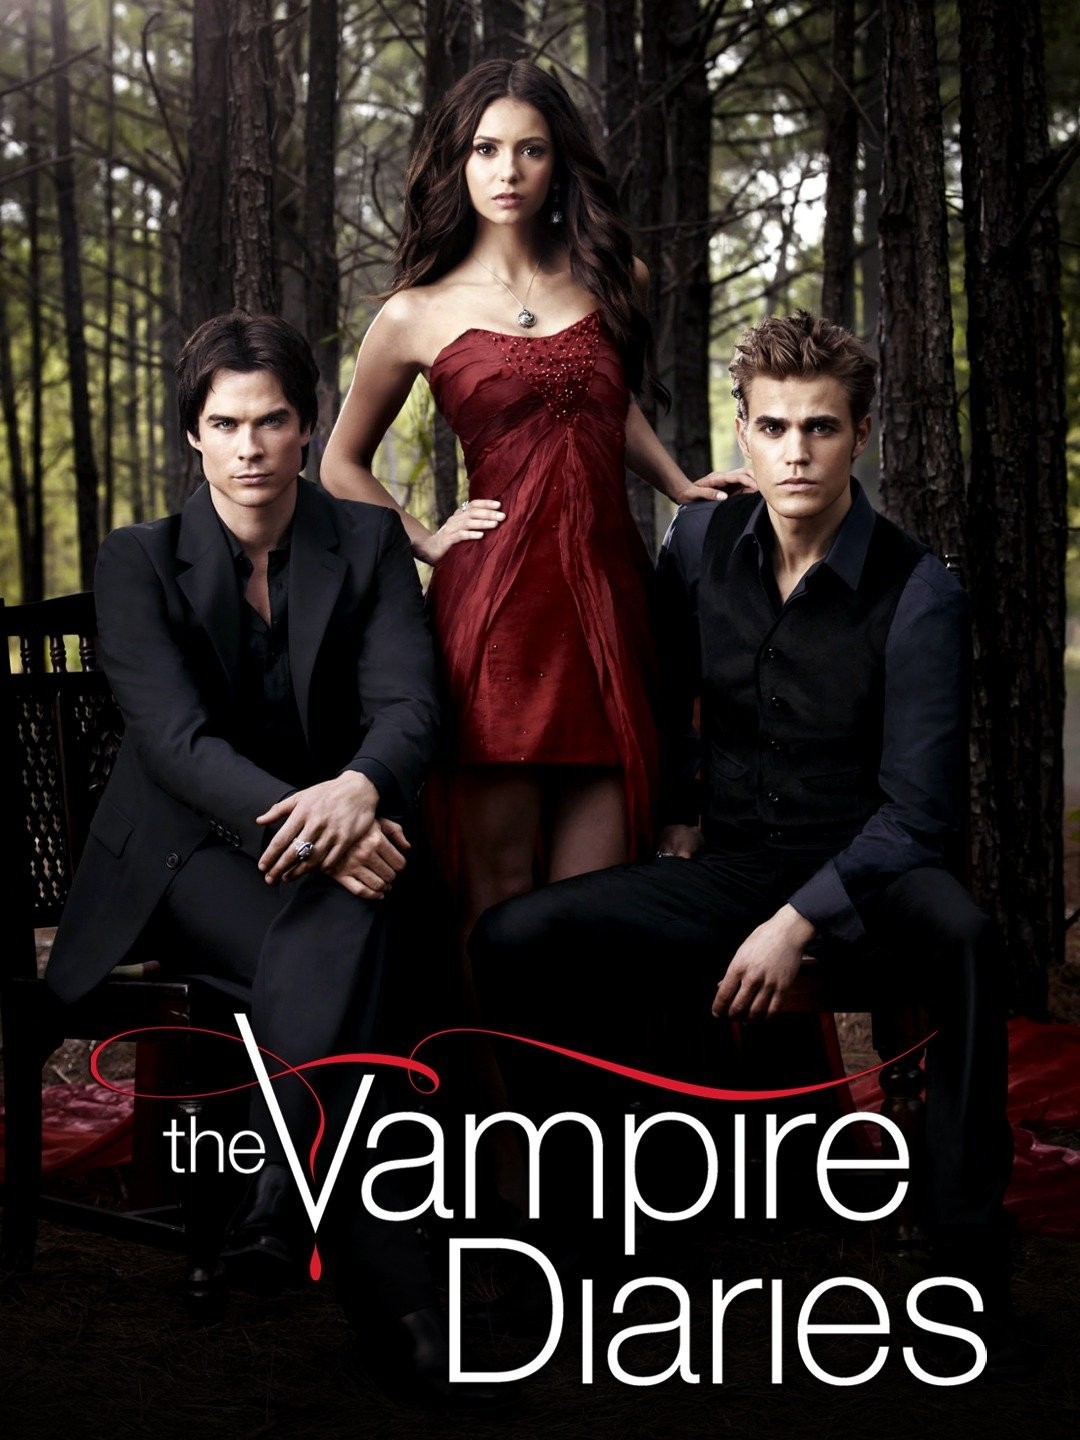 The Leading Lady-Well Dressed Challenge: Elena Gilbert from Vampire Diaries  